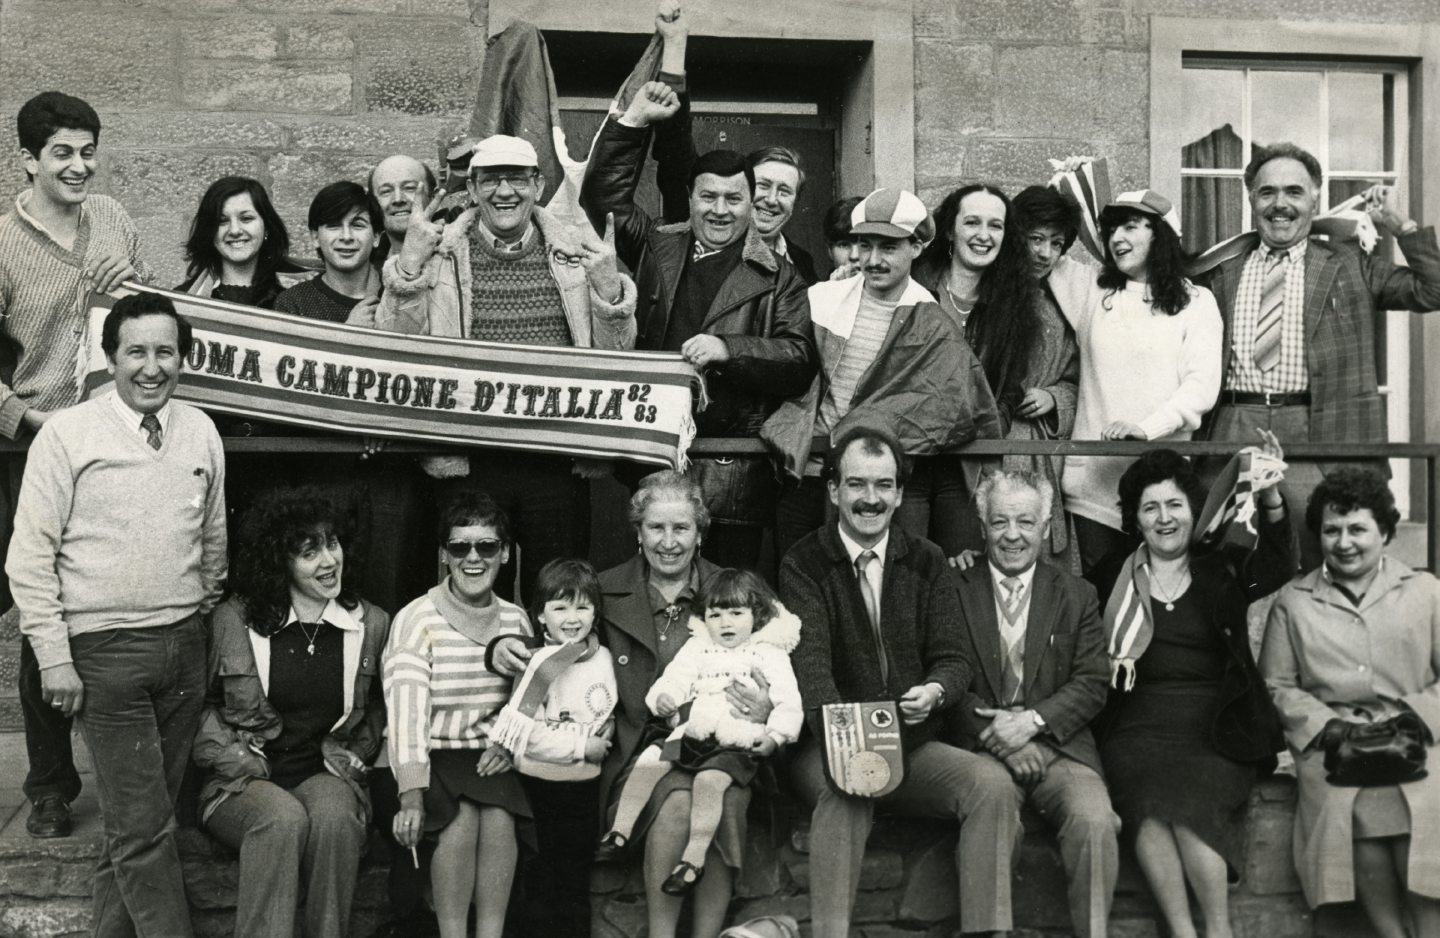 Roma supporters in Dundee in 1984.